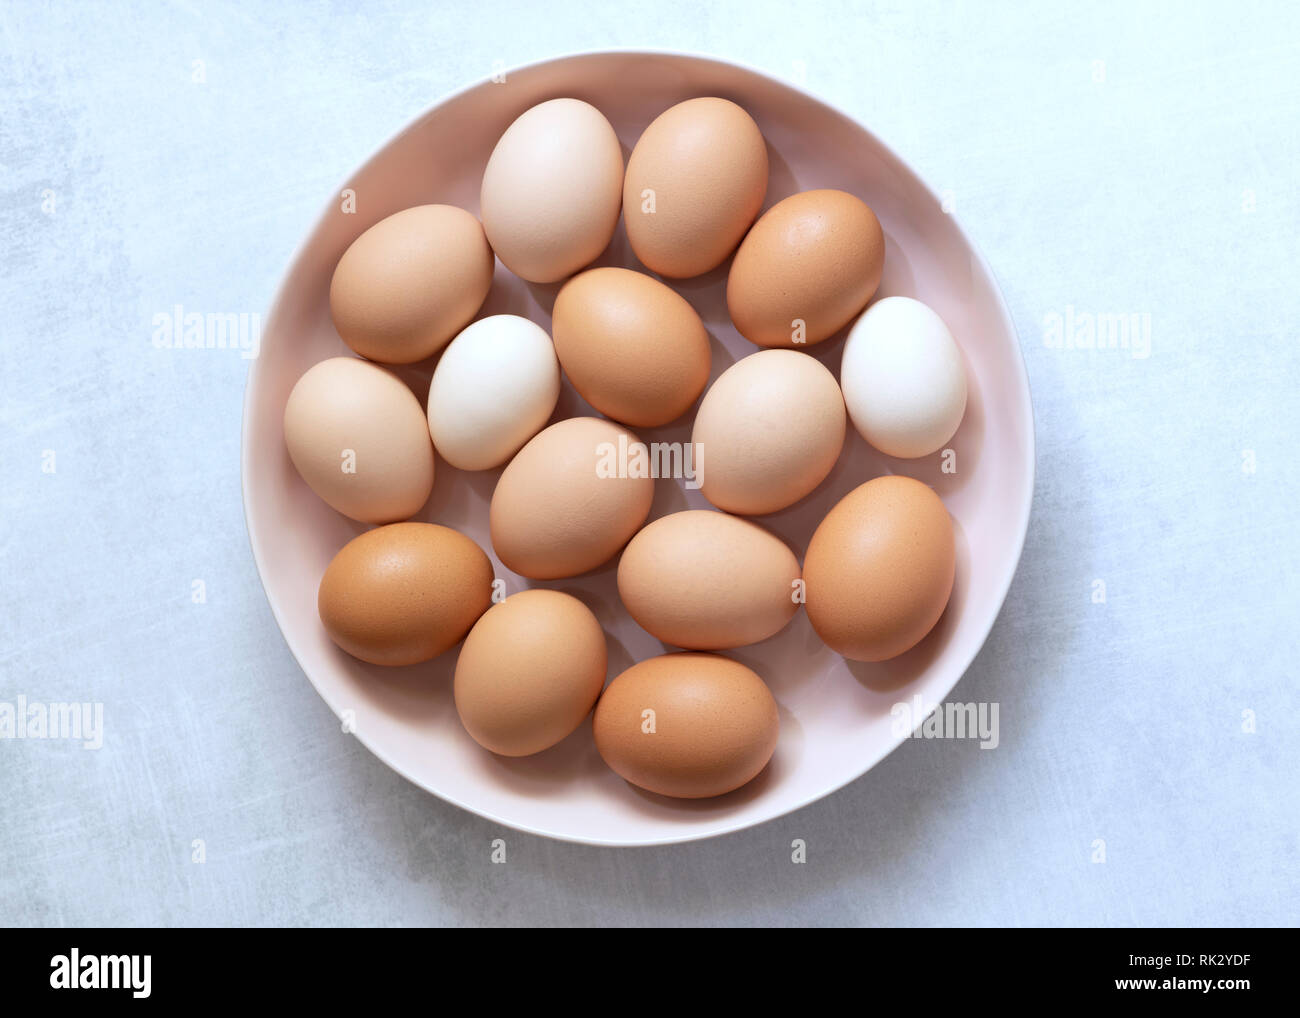 Brown and white eggs in a bowl. Stock Photo